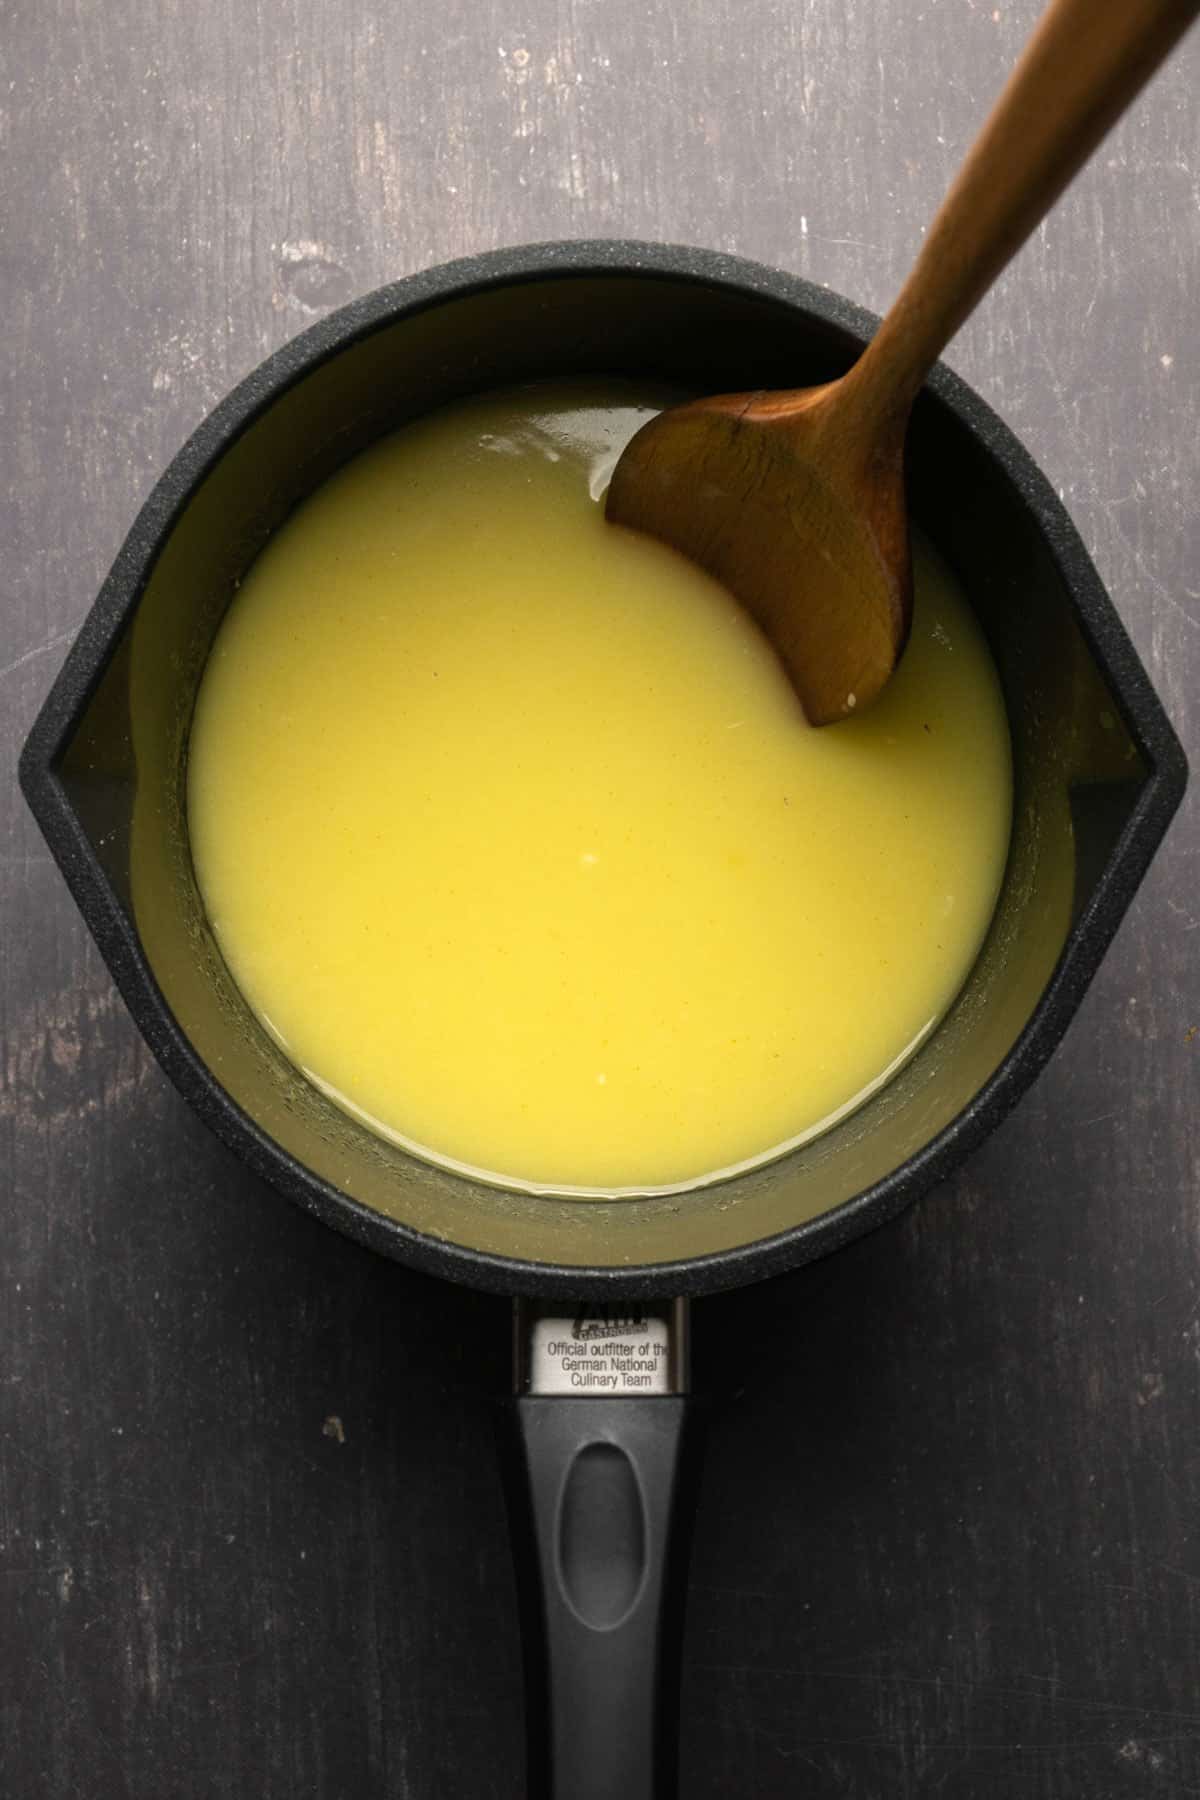 Lemon curd mix in a saucepan with a wooden spoon.